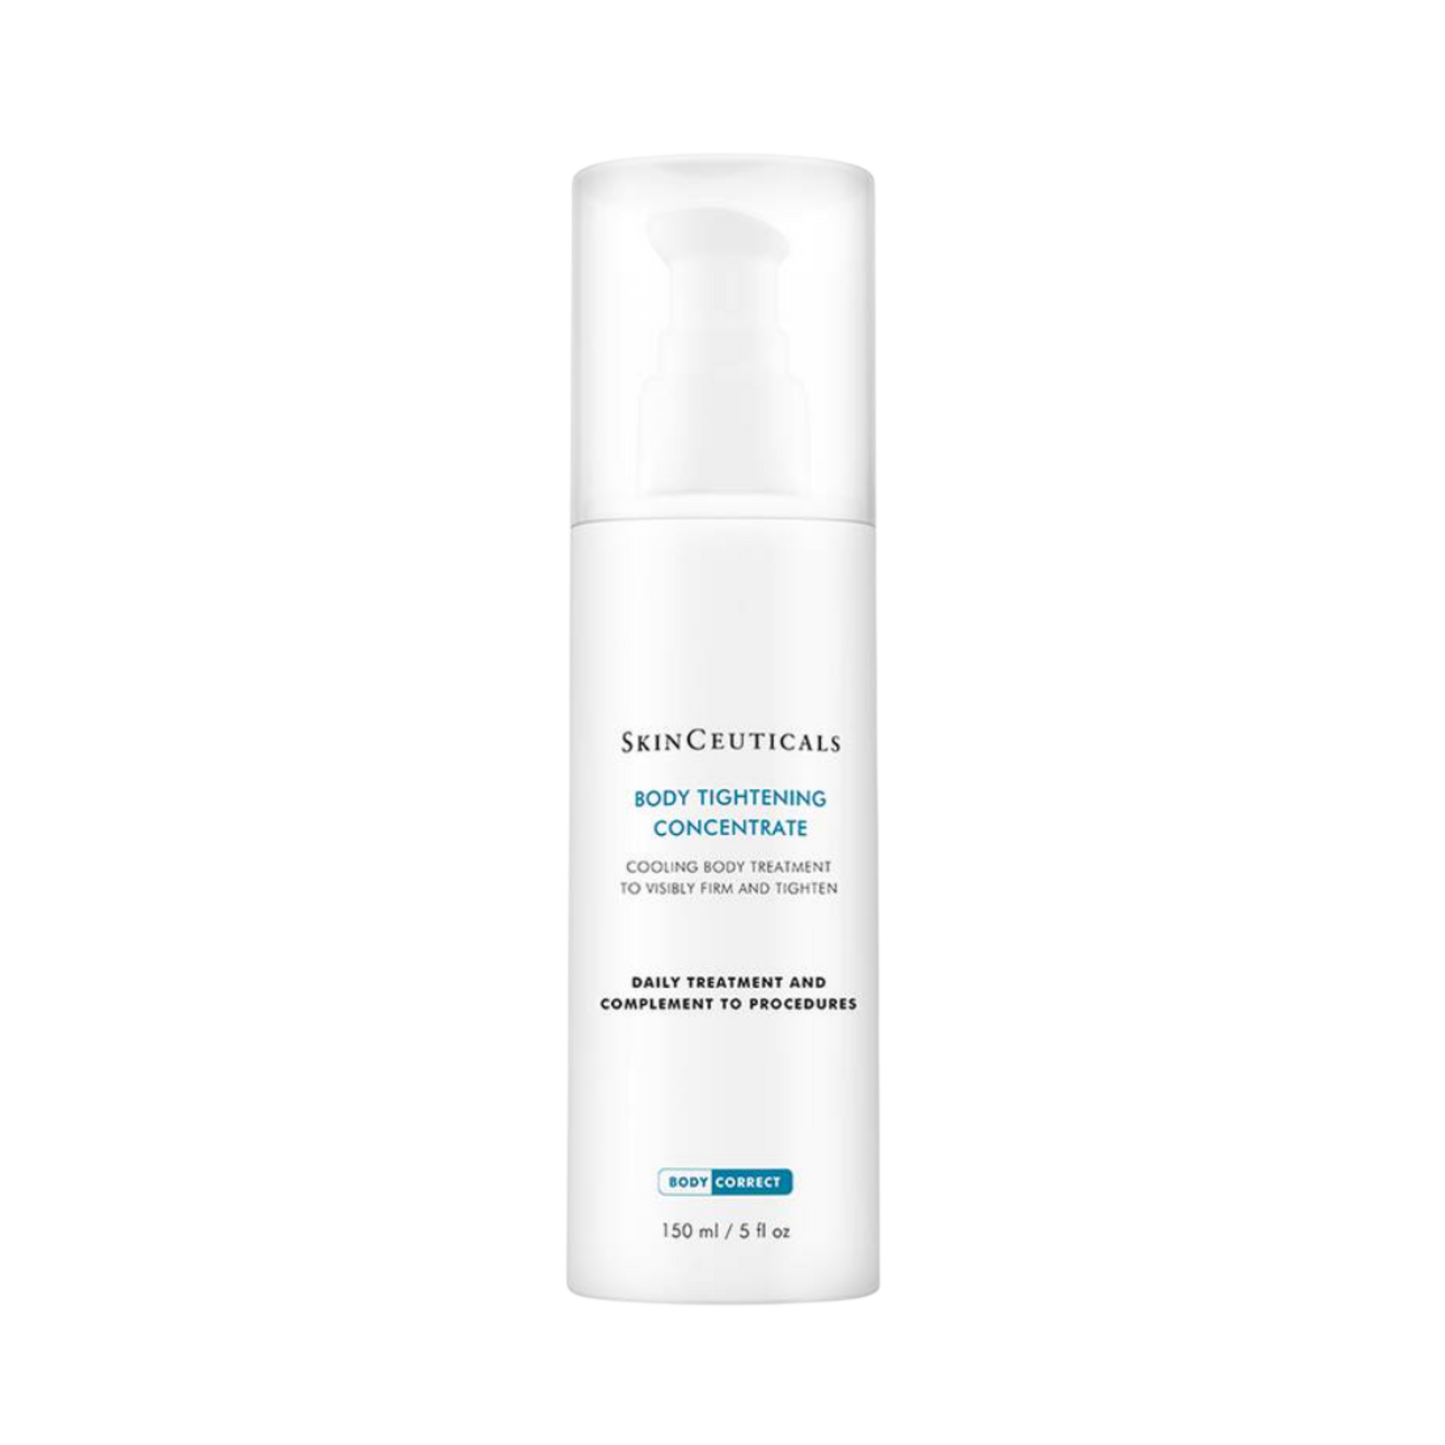 SKINCEUTICALS® BODY TIGHTENING CONCENTRATE